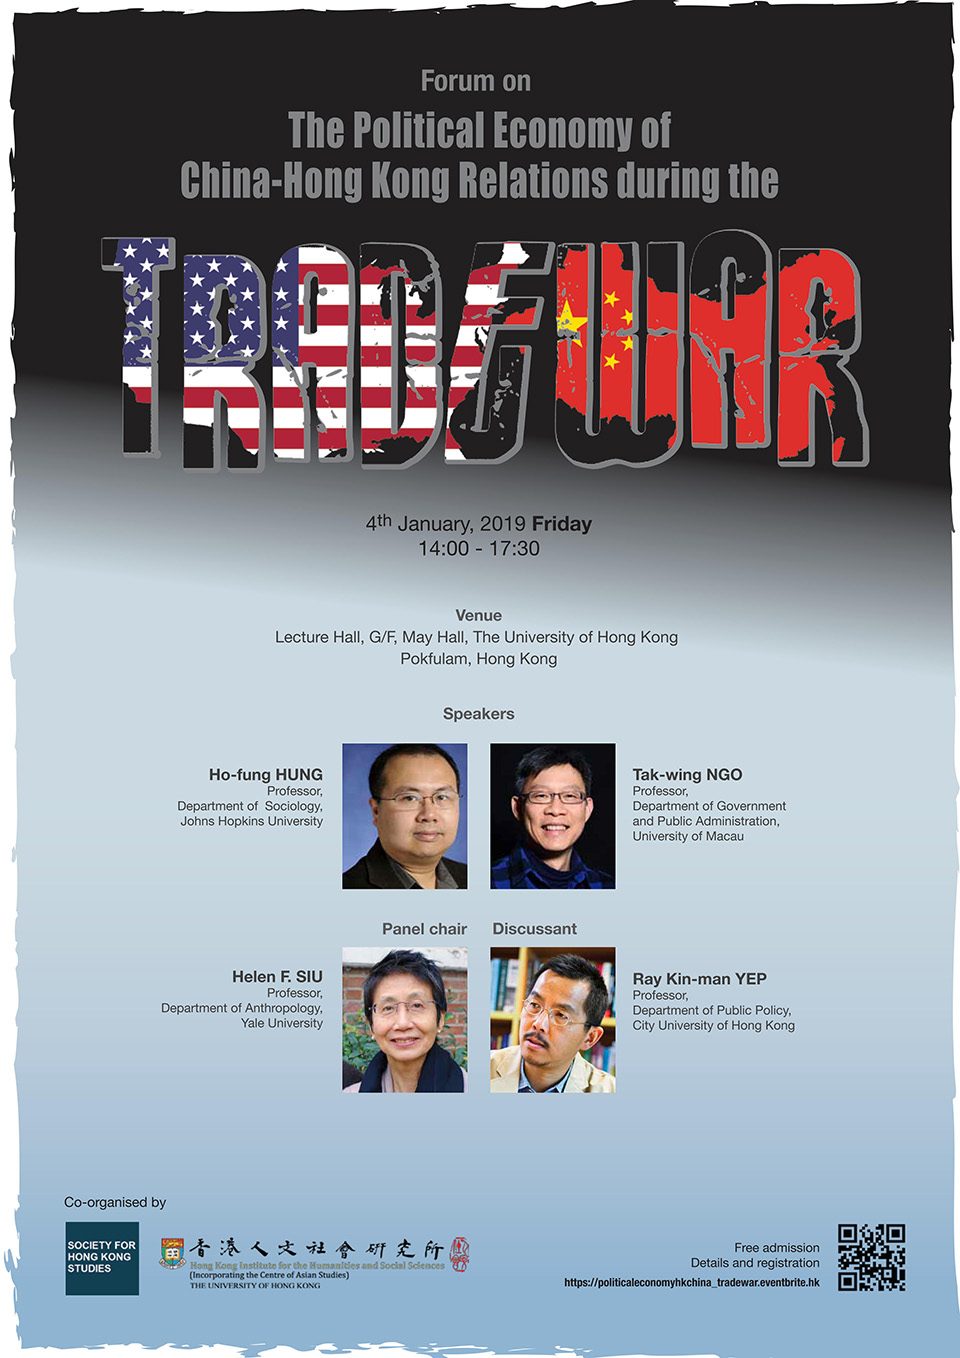 Forum on the Political Economy of China-Hong Kong Relations during the Trade War (January 4, 2019)